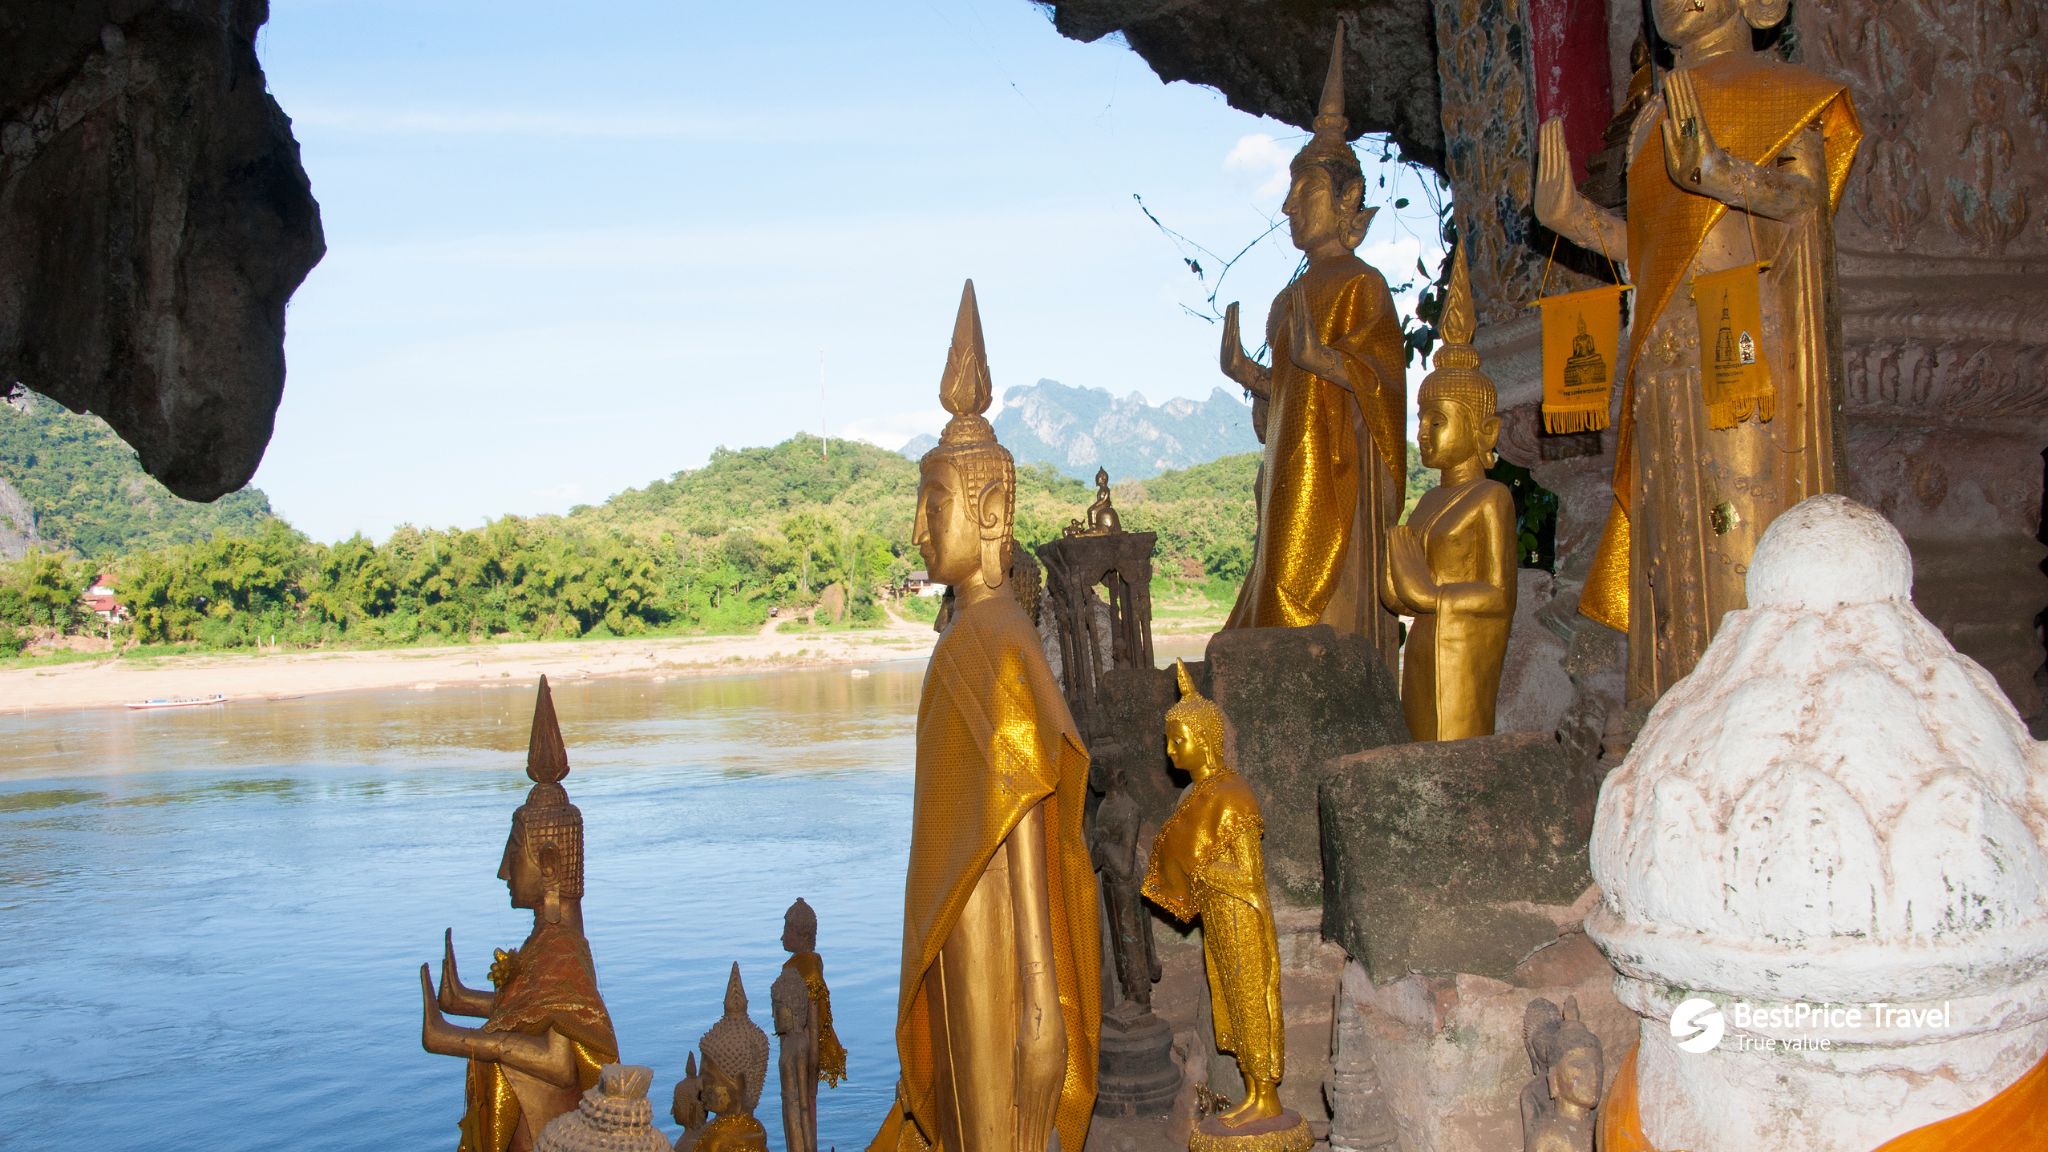 Day 5 Visit The Mysterious Pak Ou Caves Of Mekong River